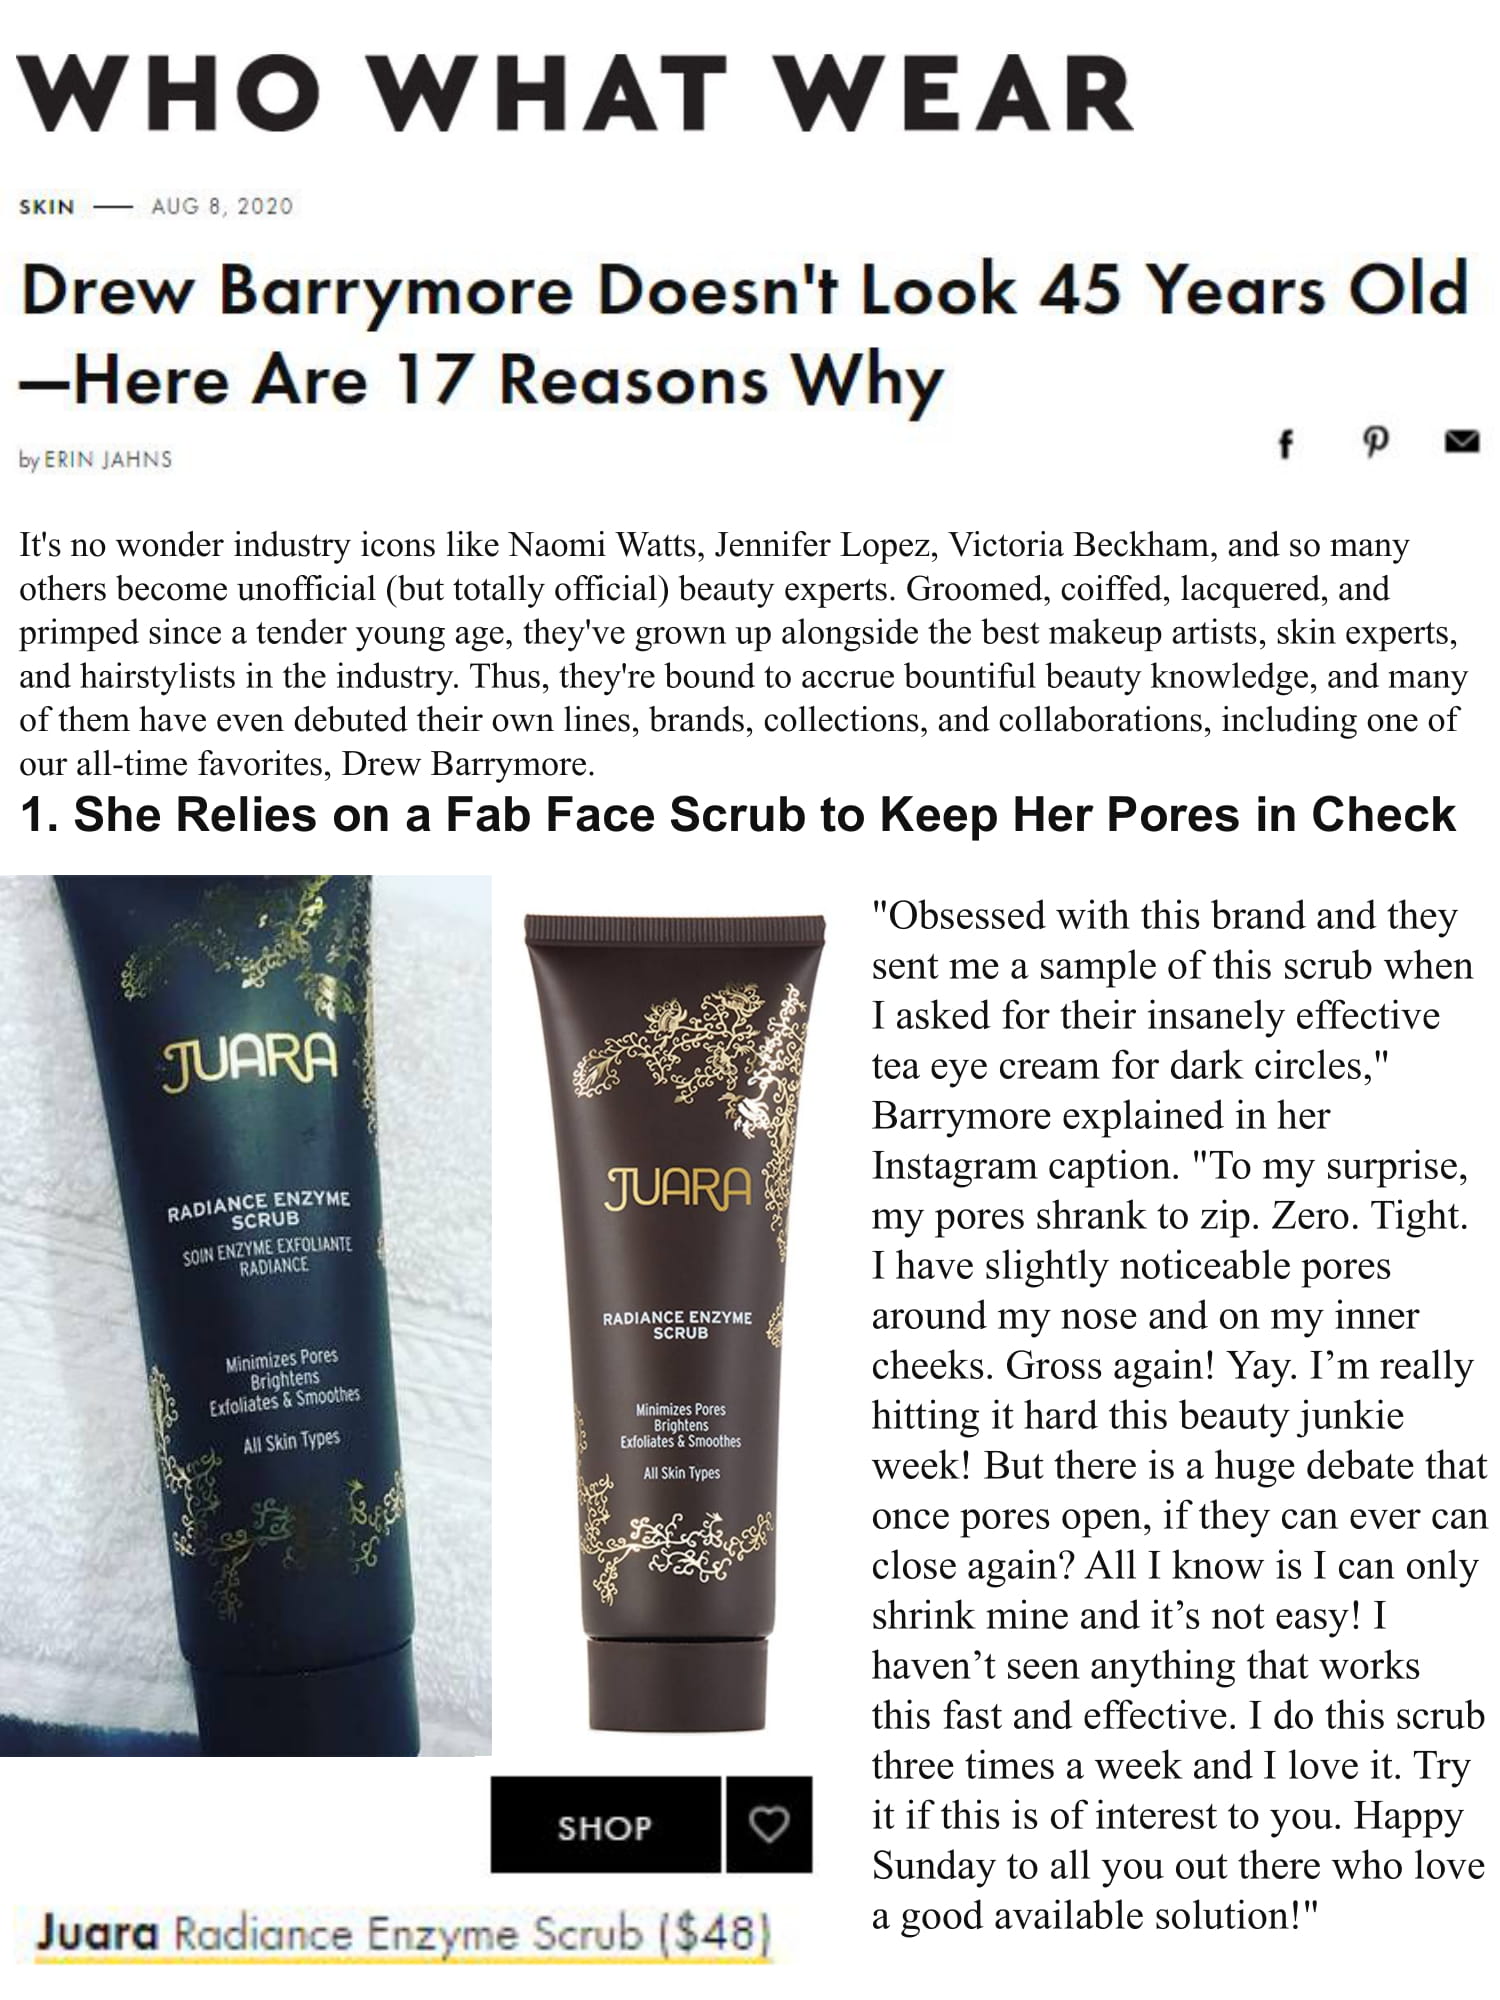 WHO WHAT WEAR : Drew Barrymore Doesn't Look 45 Years Old - Here Are 17 Reasons Why JUARA Skincare